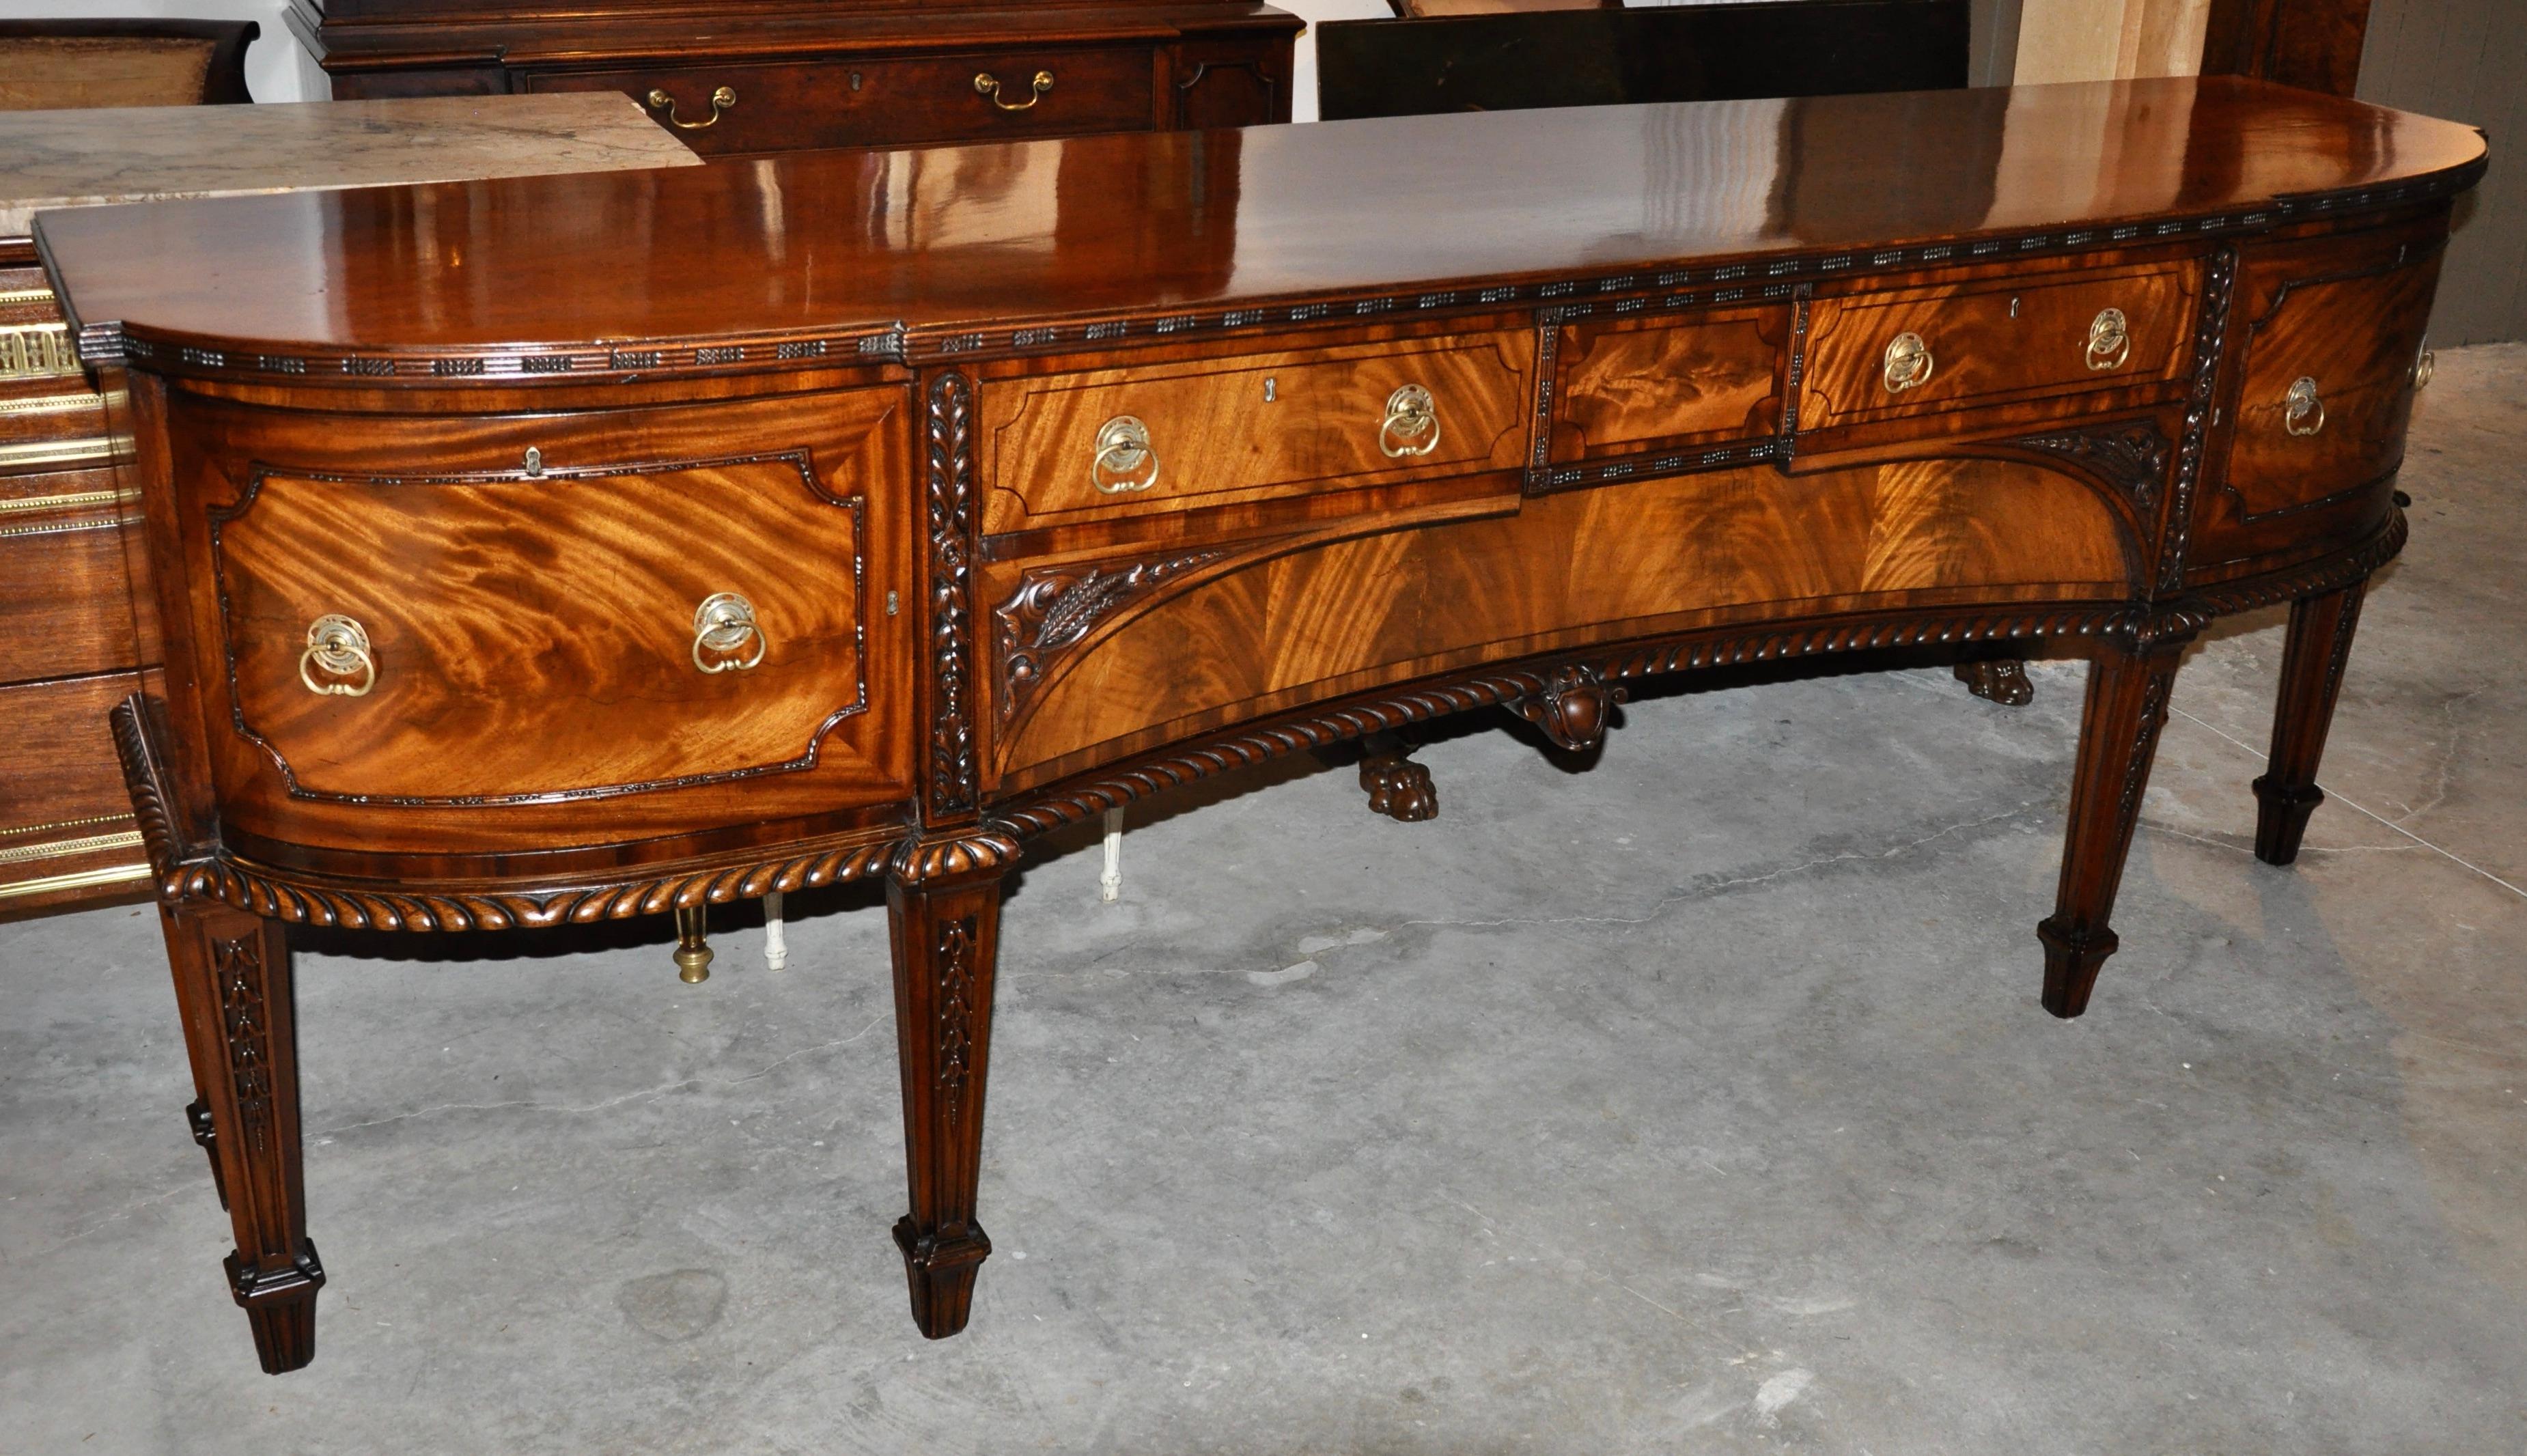 Early 19th century Irish mahogany sideboard. Well figured wood with carvings of wheat and bellflowers. With right wine drawer and early pulls. Great length yet shallow depth.